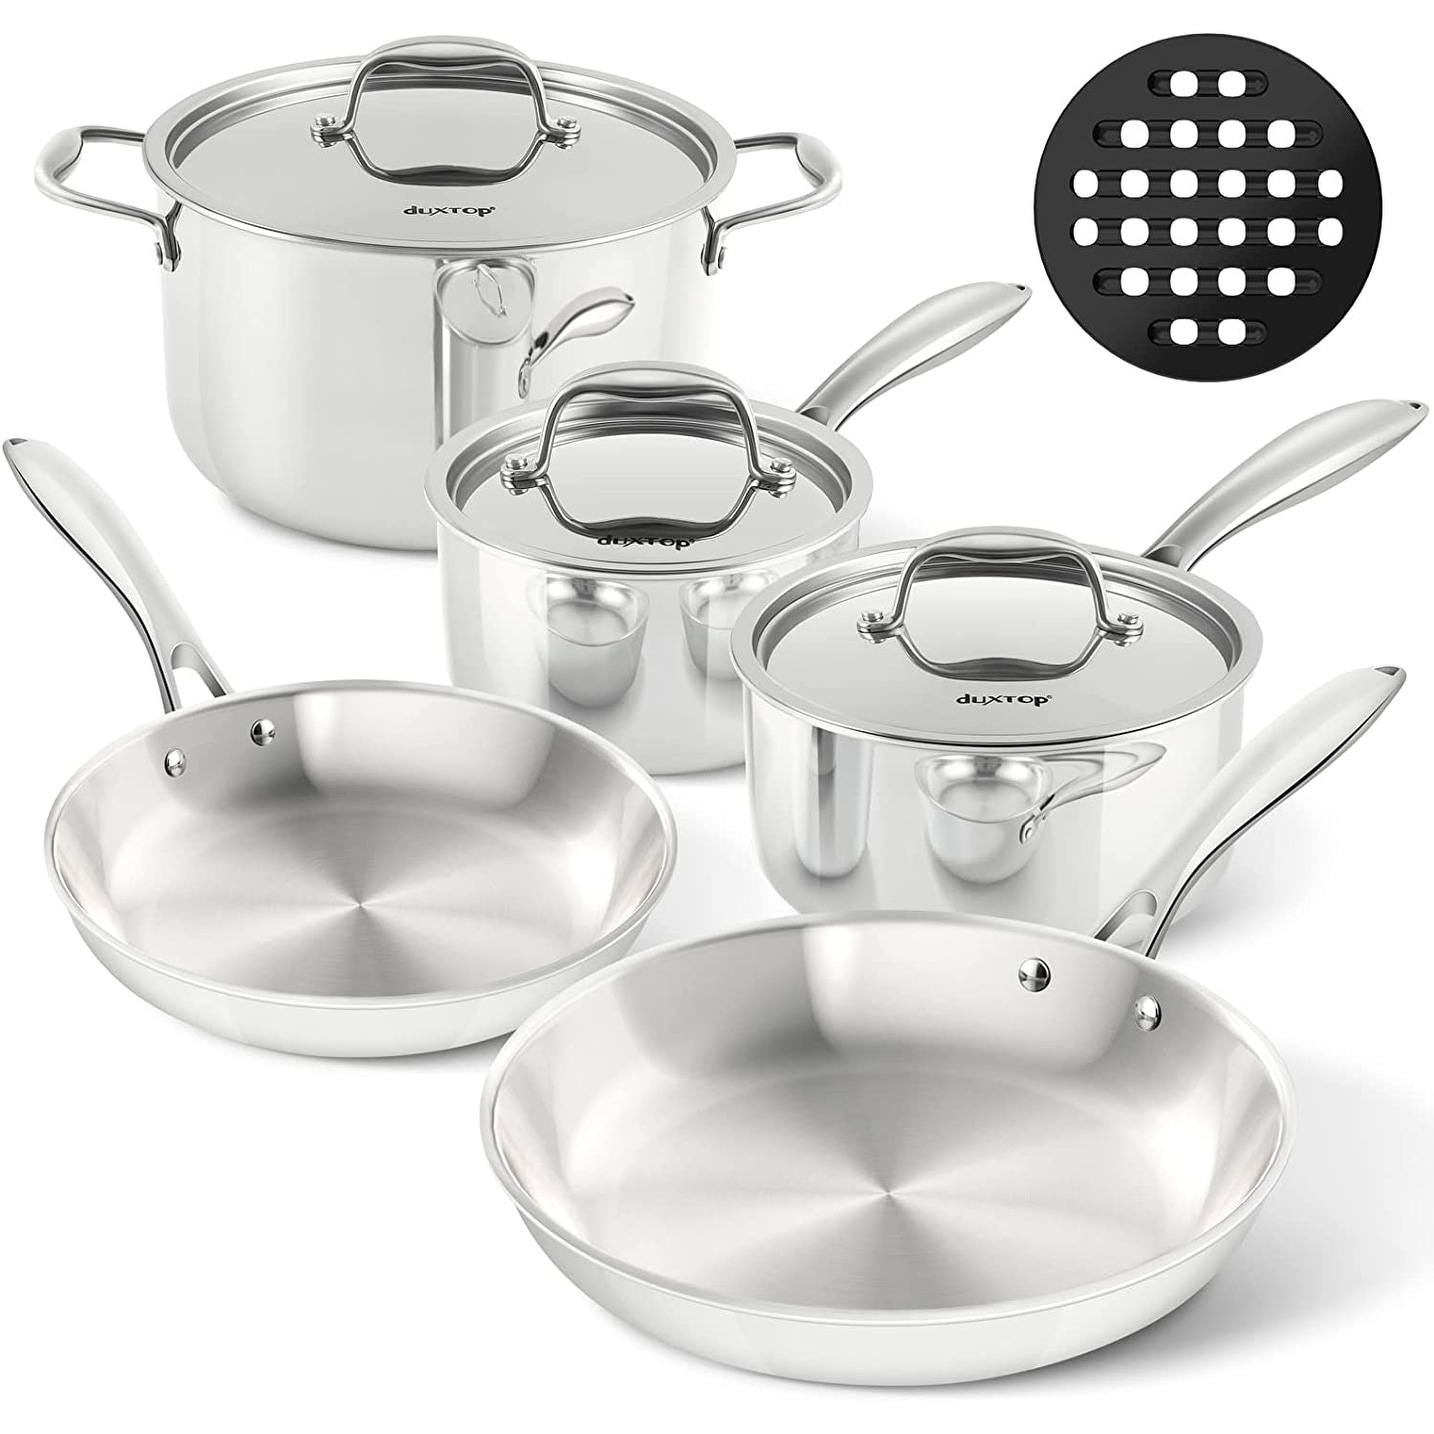 https://ak1.ostkcdn.com/images/products/is/images/direct/ea9bb1df6cd57d9b9f7991a1bce08e4def950822/Whole-Clad-Tri-Ply-Stainless-Steel-Induction-Cookware-Set%2C-9PC-Kitchen-Pots-and-Pans-Set.jpg